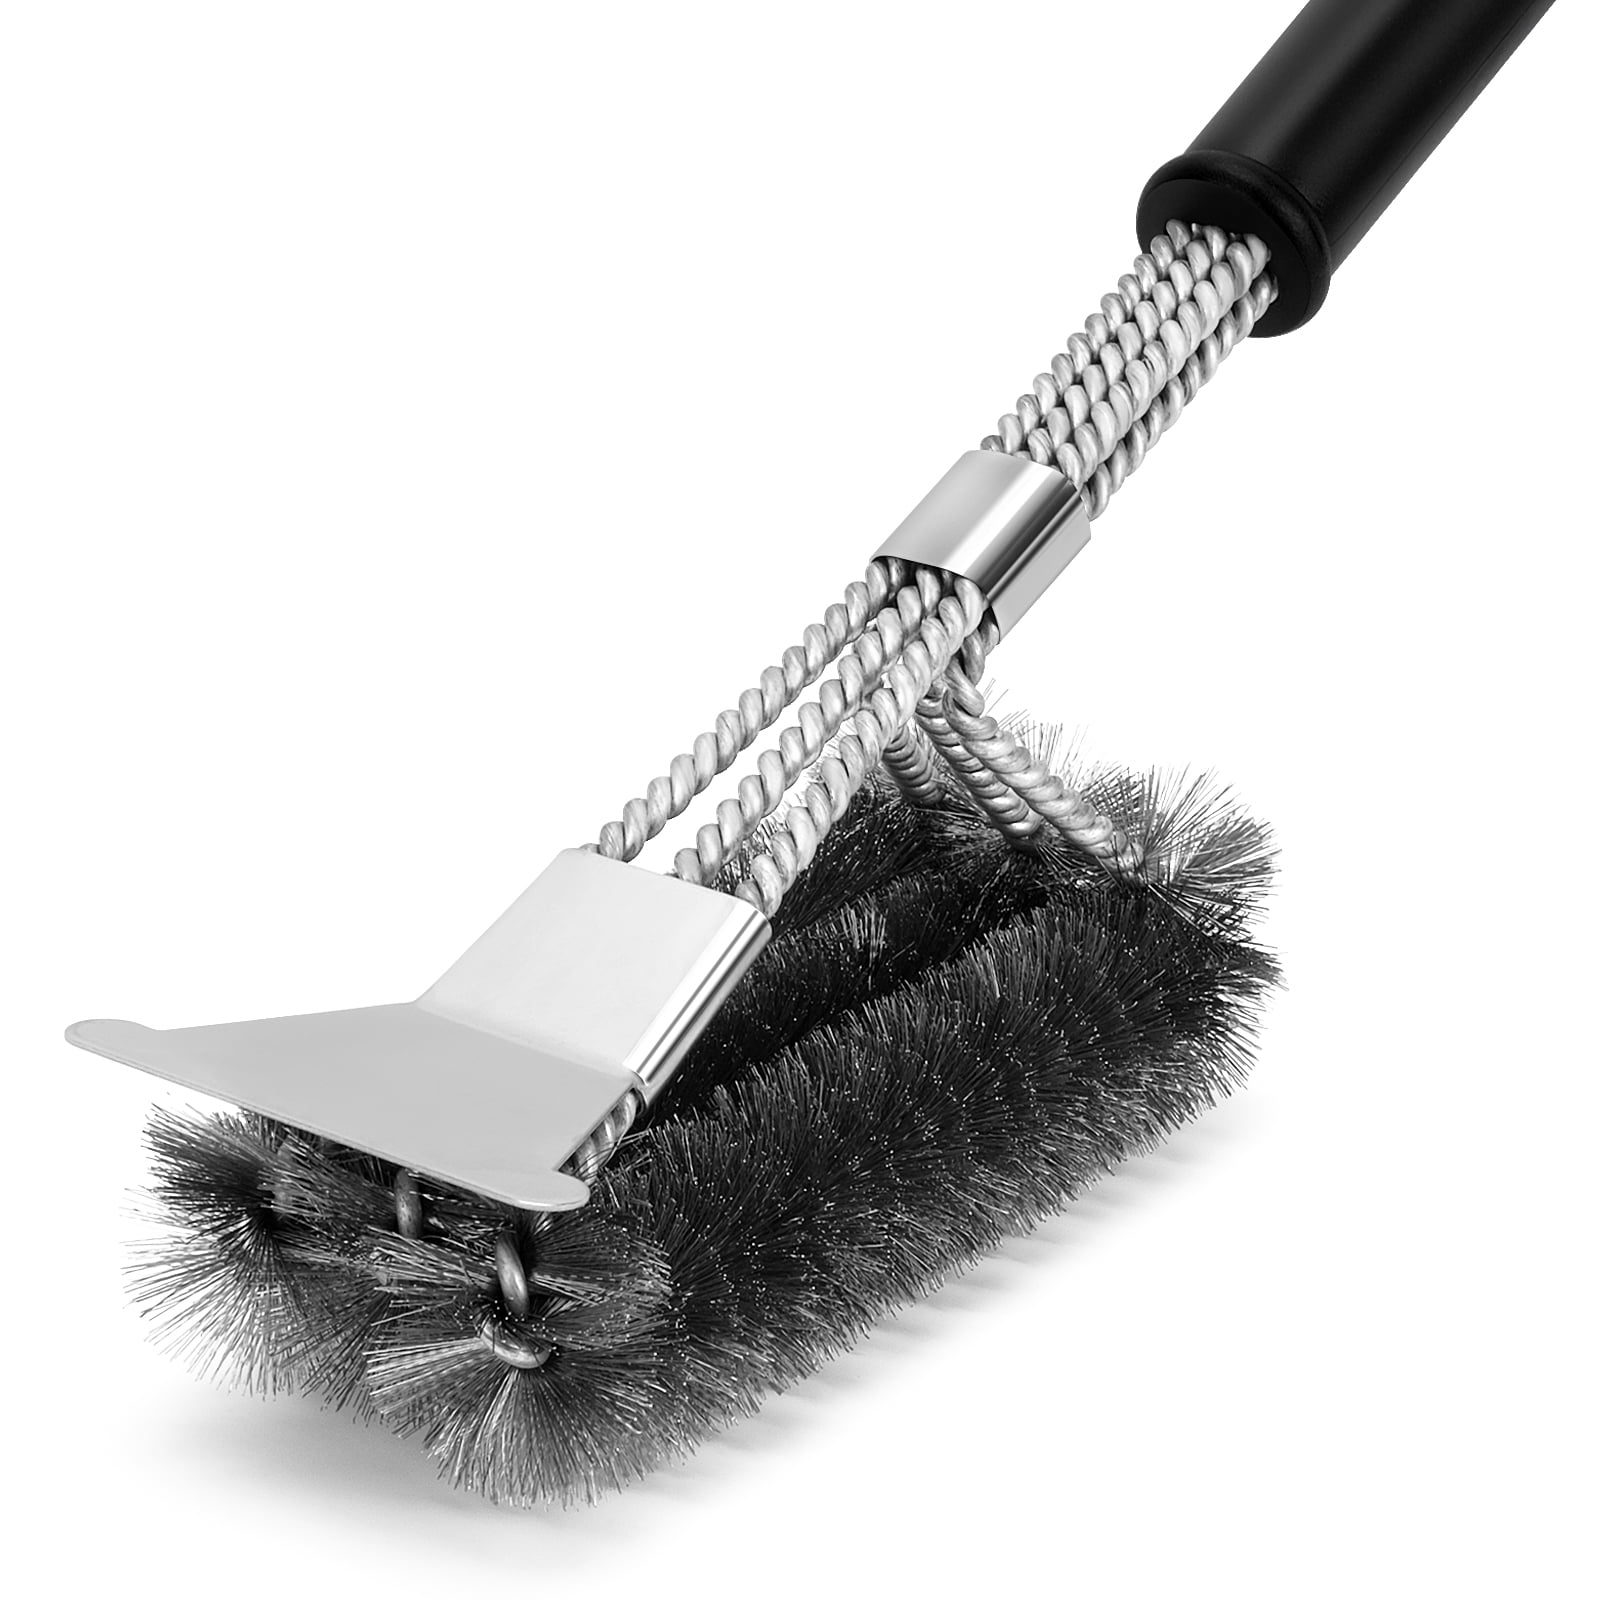 Brinkmann Grill Combo Cleaning Brush 812-9063-S New 2 Pack 